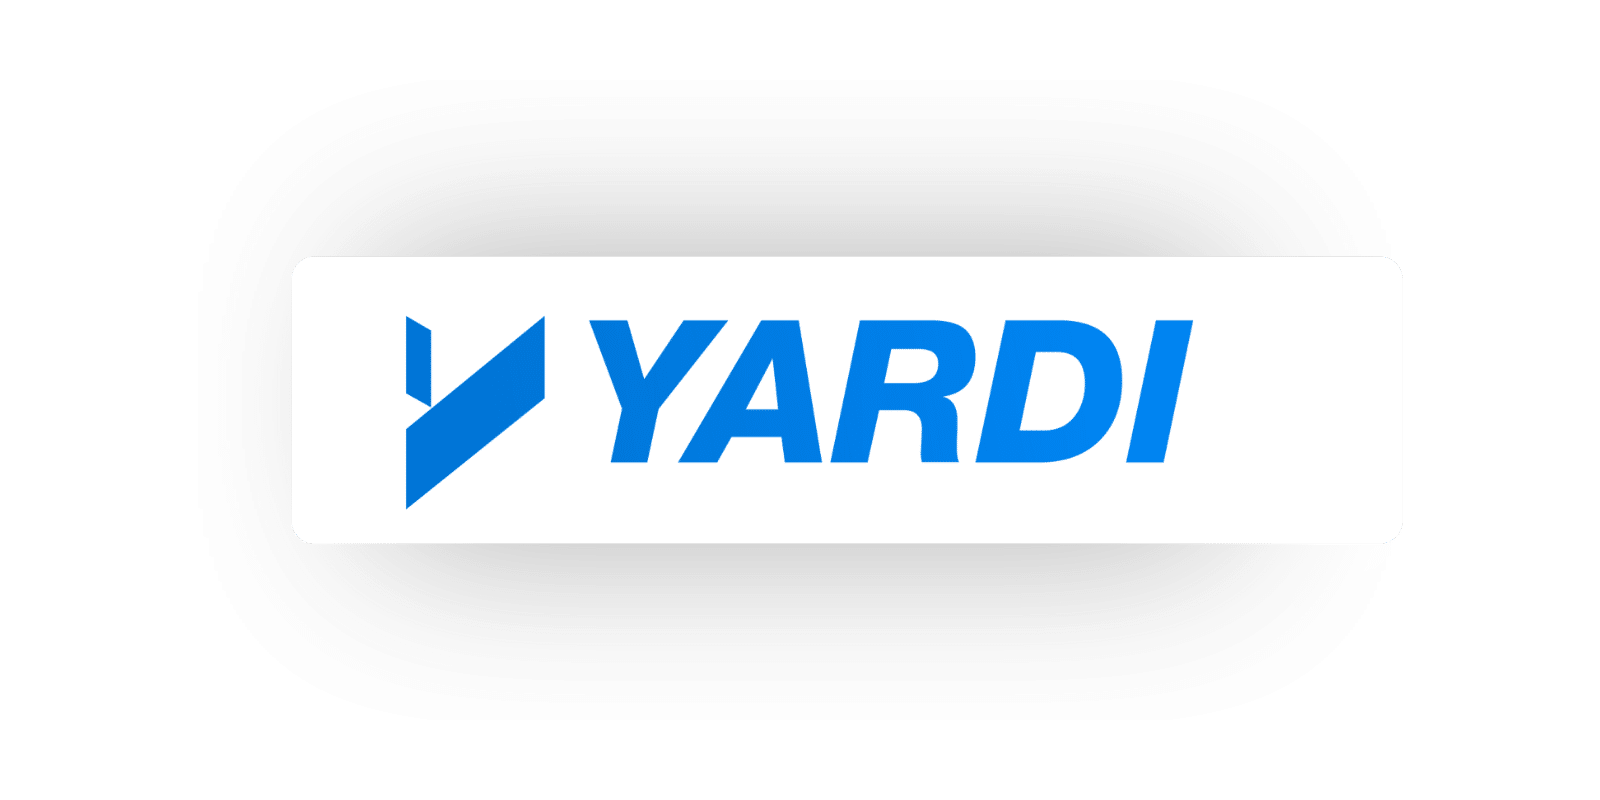 Grace Hill is now a member of the Standard Interfaces Partnership Program with Yardi, a trusted developer of property management software. Our newest integration simplifies the process of passing data from Voyager to KingsleySurveys.